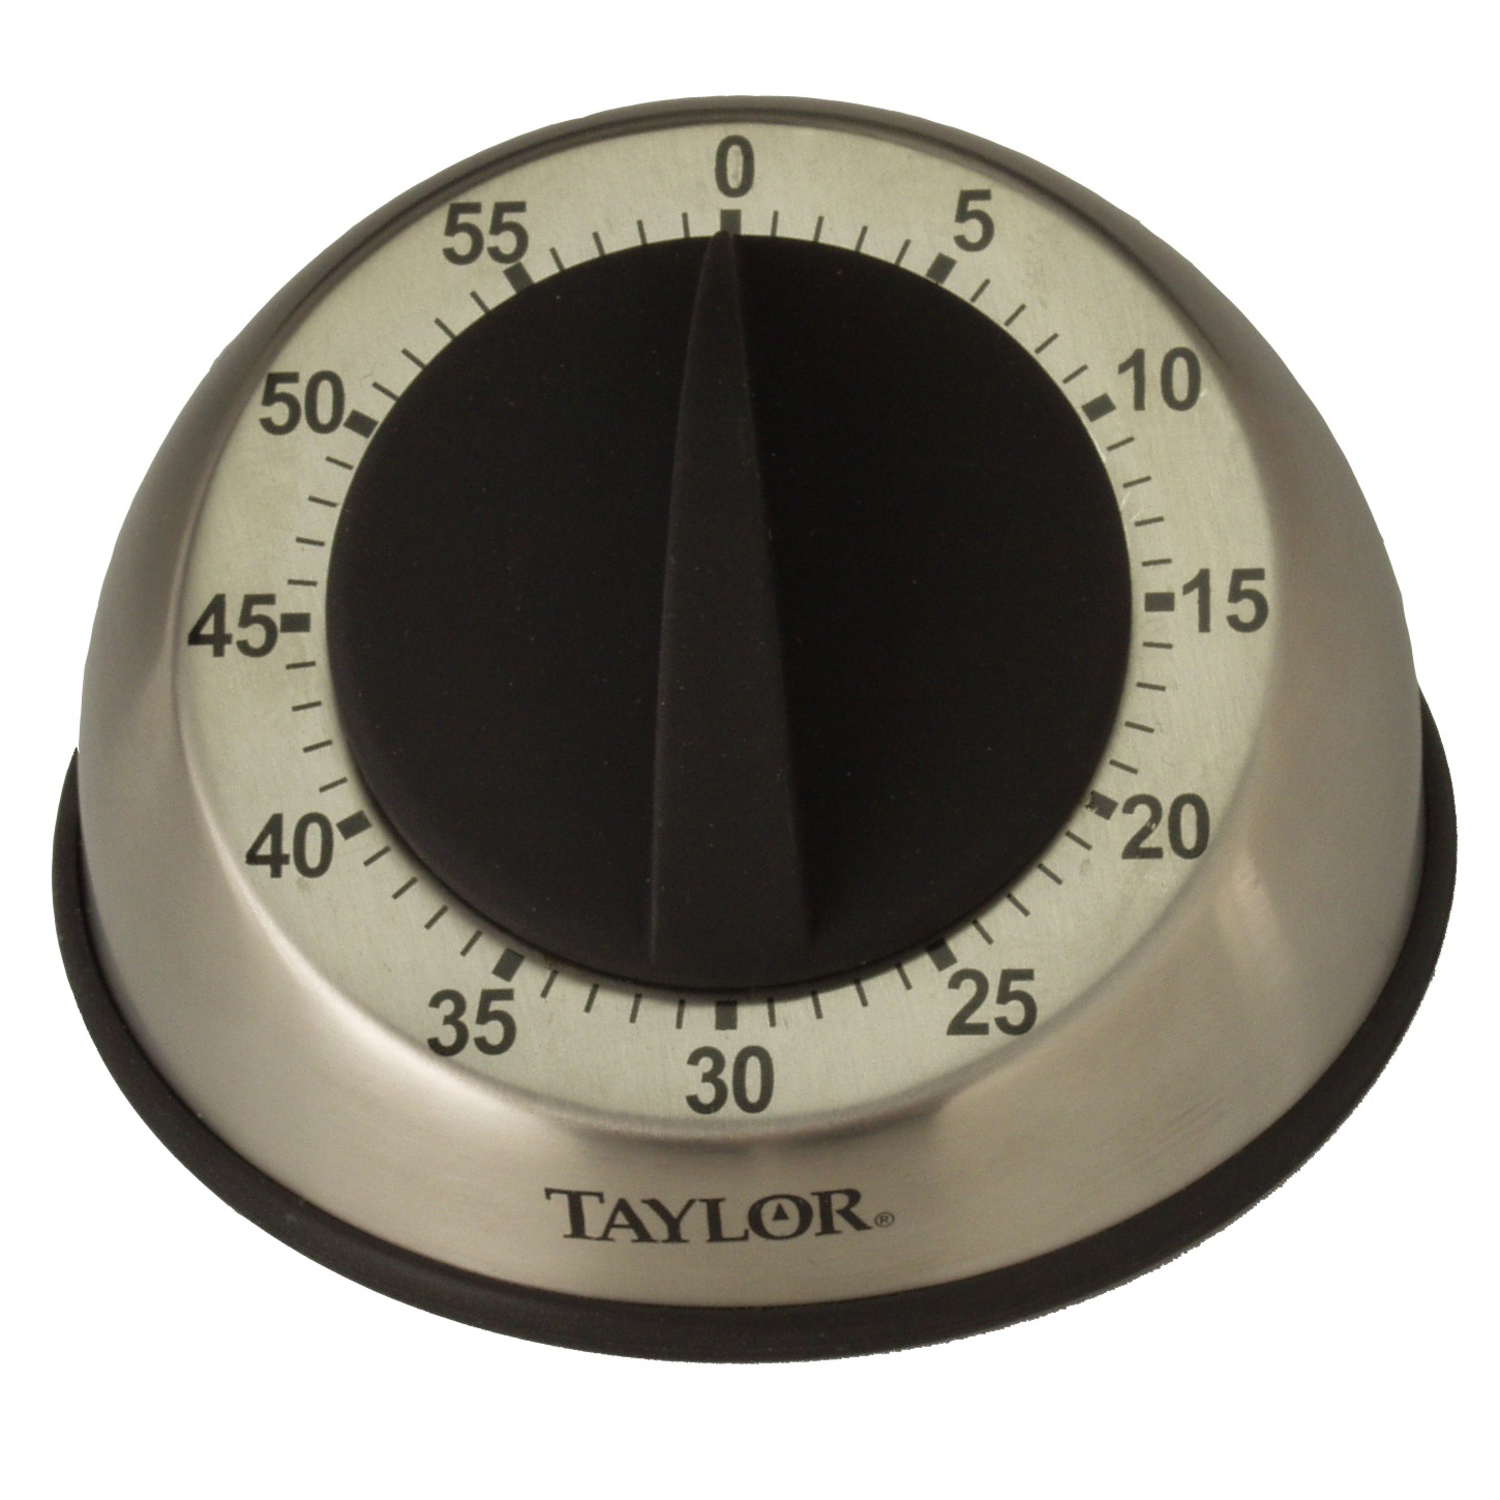 Photos - Other Accessories Taylor Pro Mechanical Stainless Steel Timer 5830 